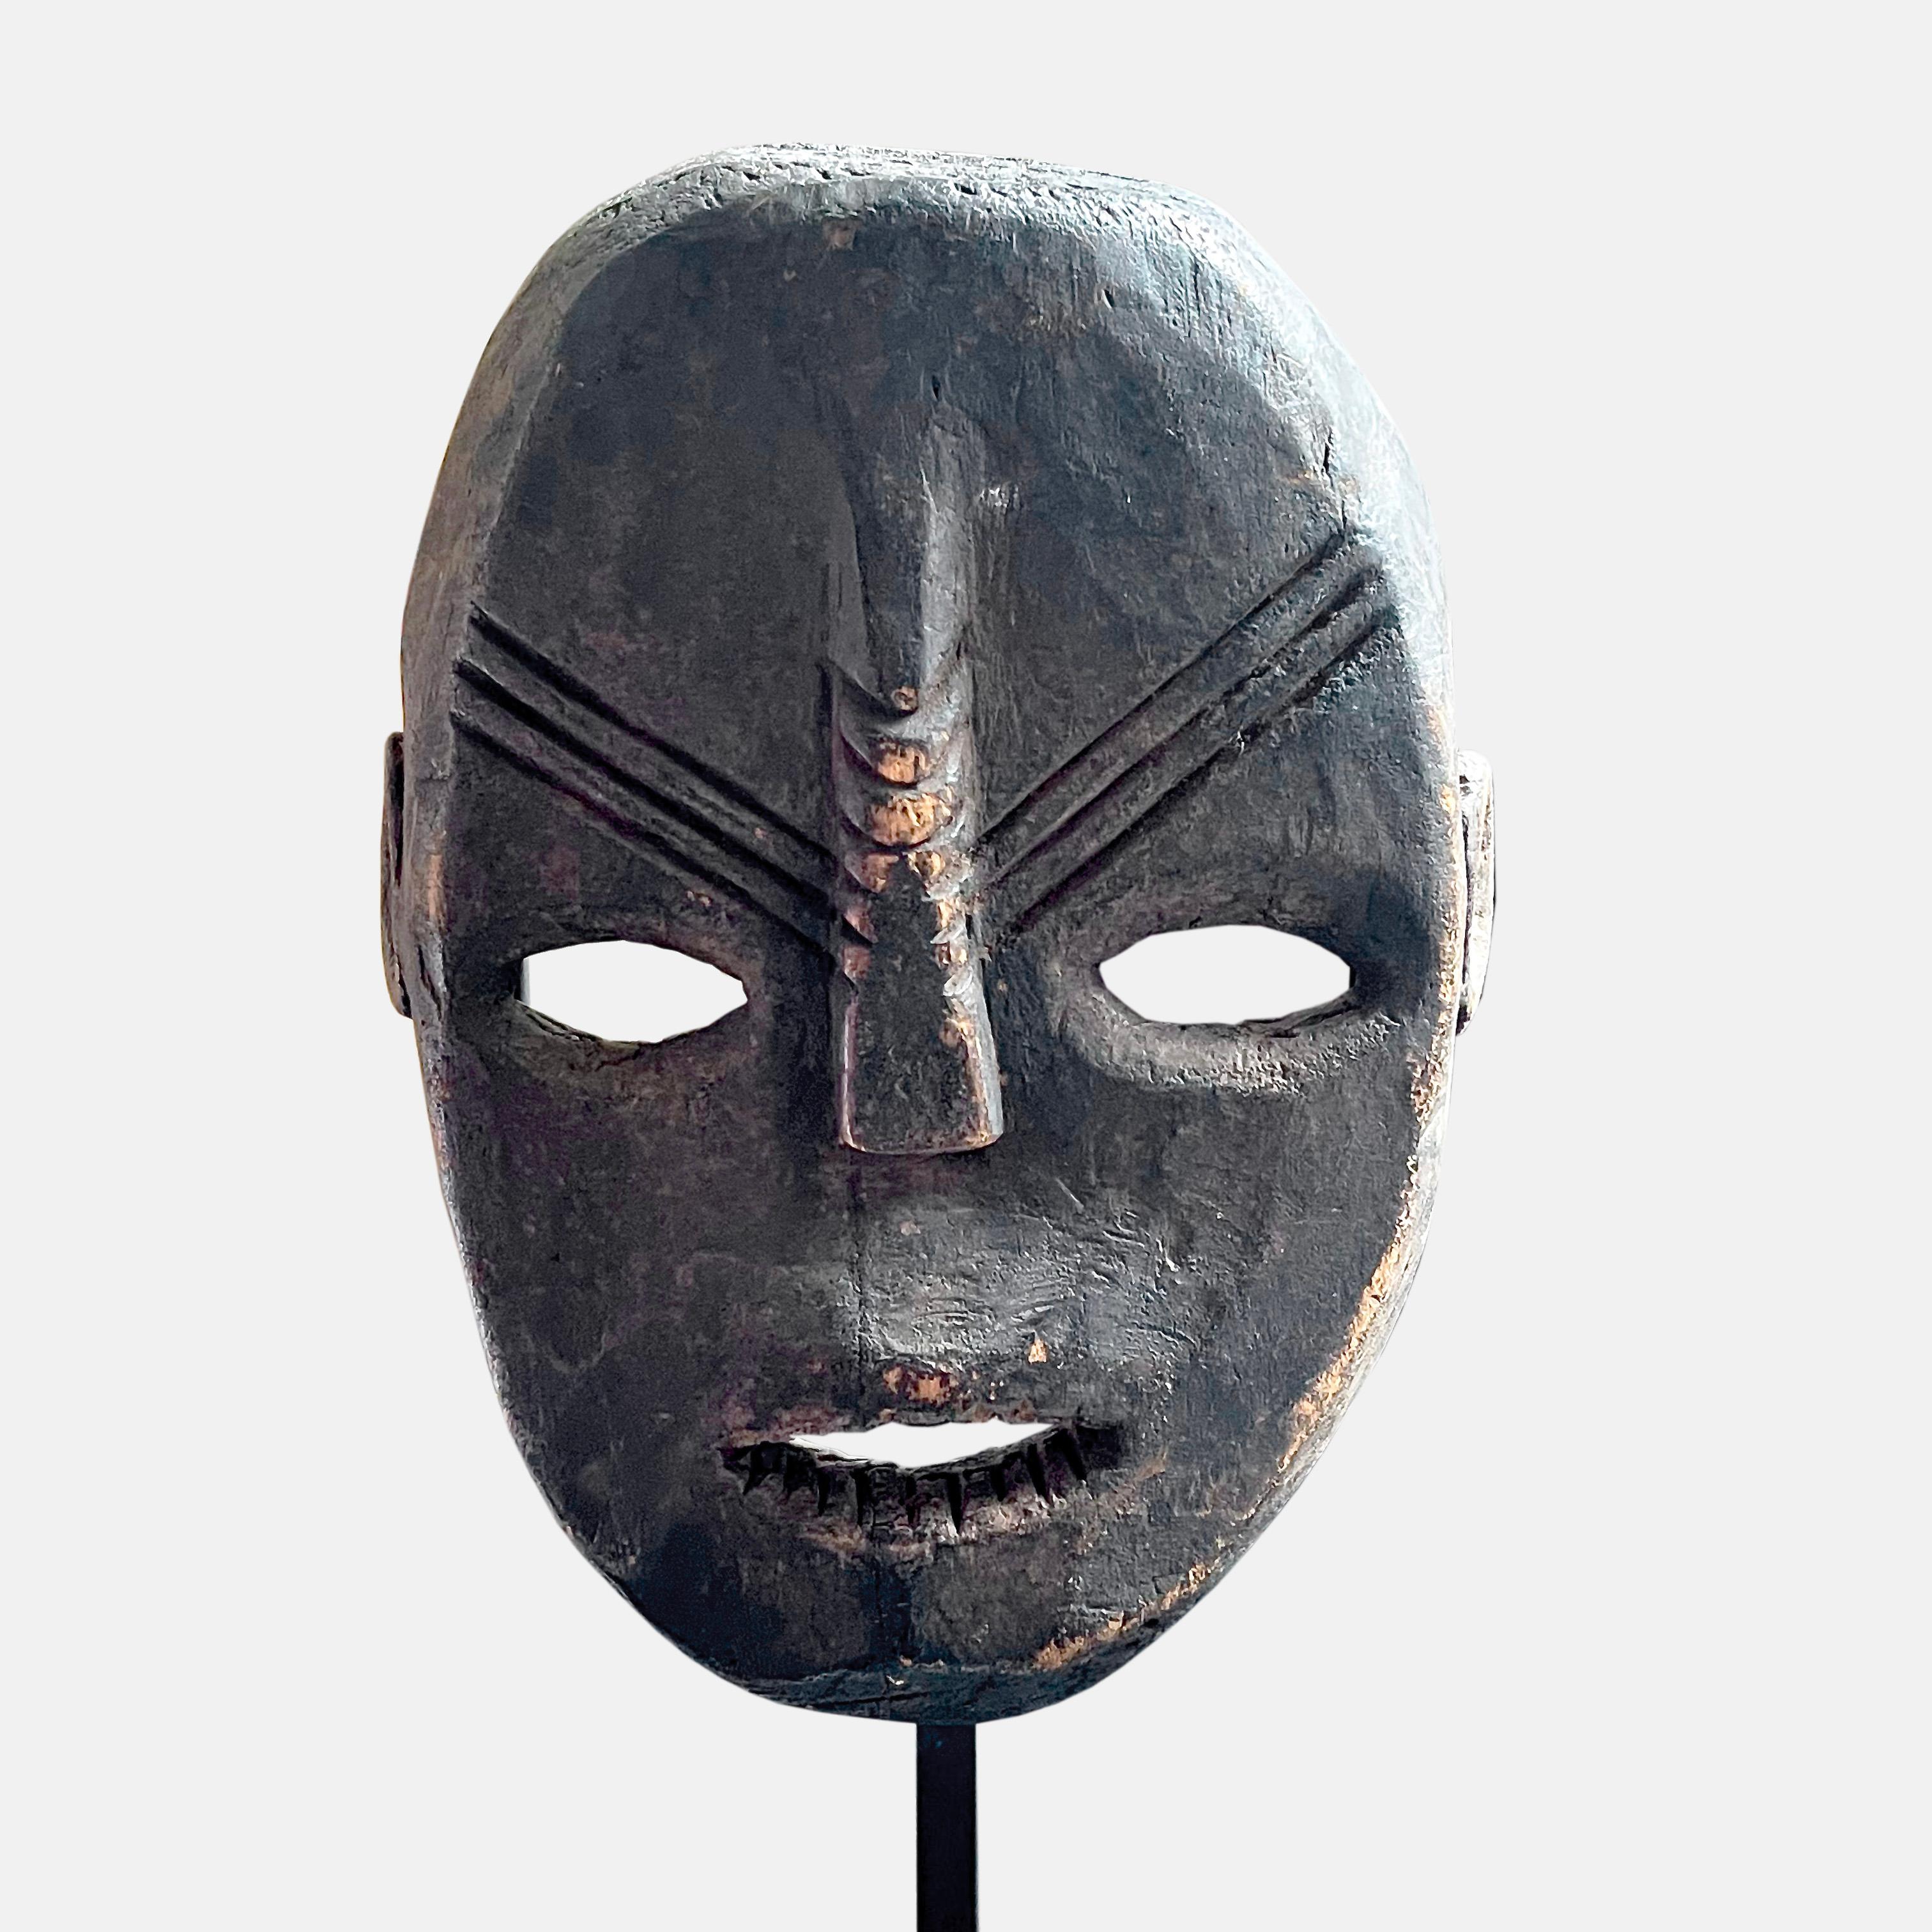 Ngbaka Congolese Tribal Mask for Initiation Rituals, Early 20th Century For Sale 3